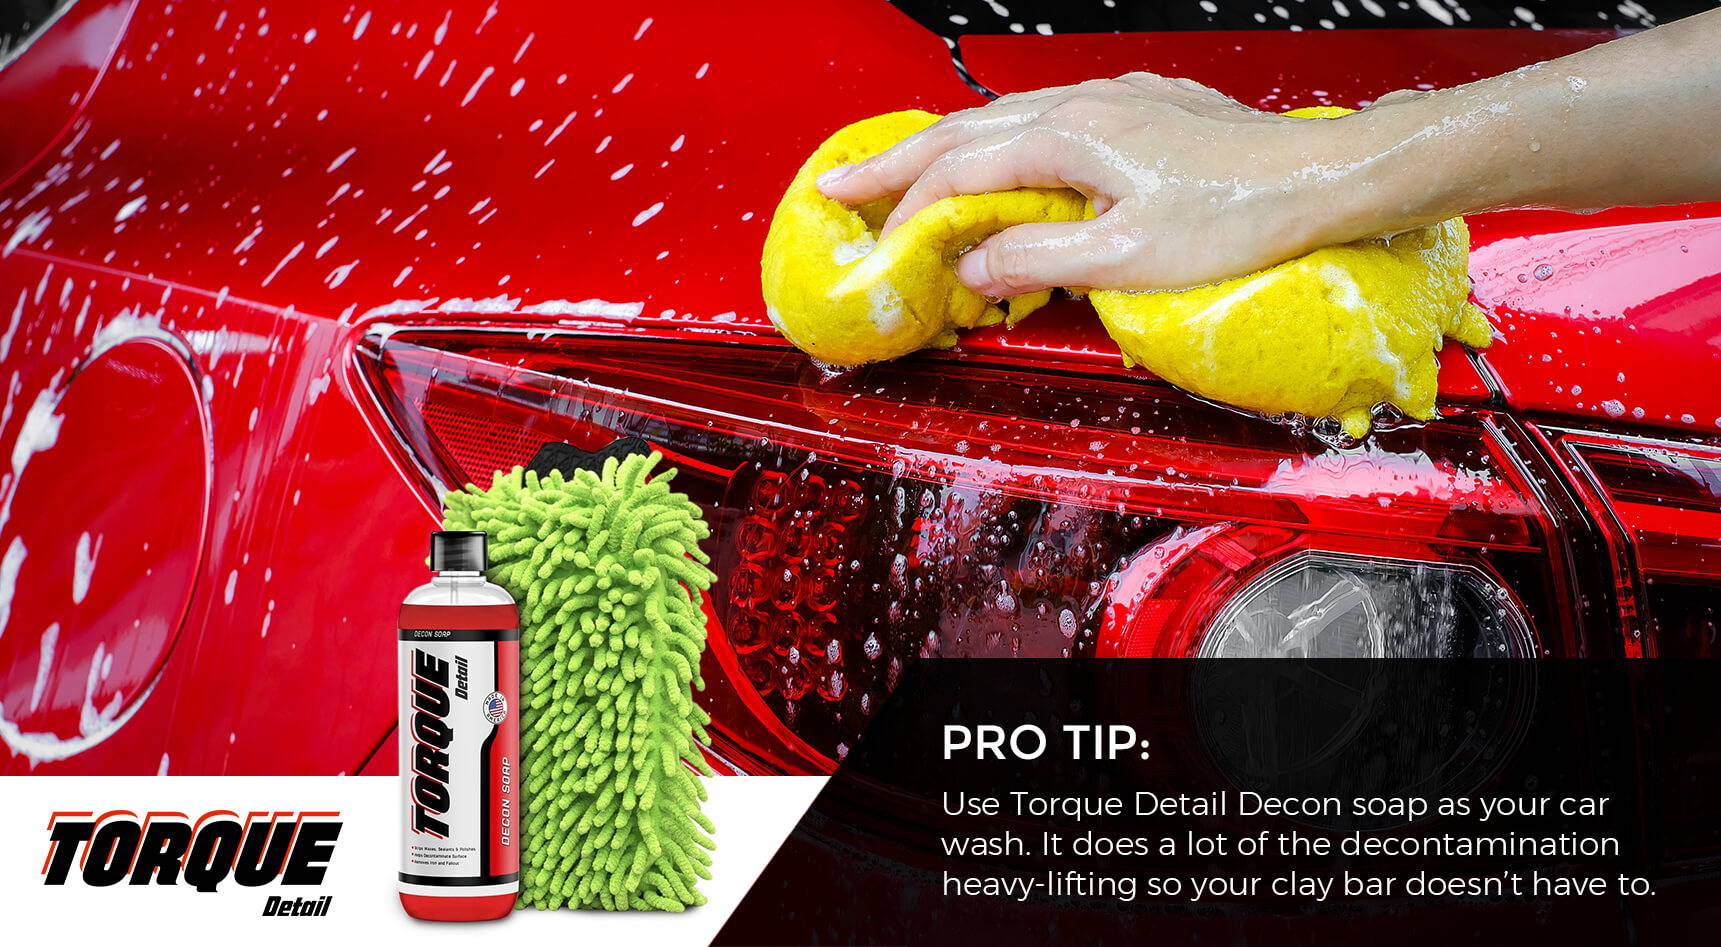 Can You Use Dish Soap To Wash Your Car? (Dawn Dish Soap?)